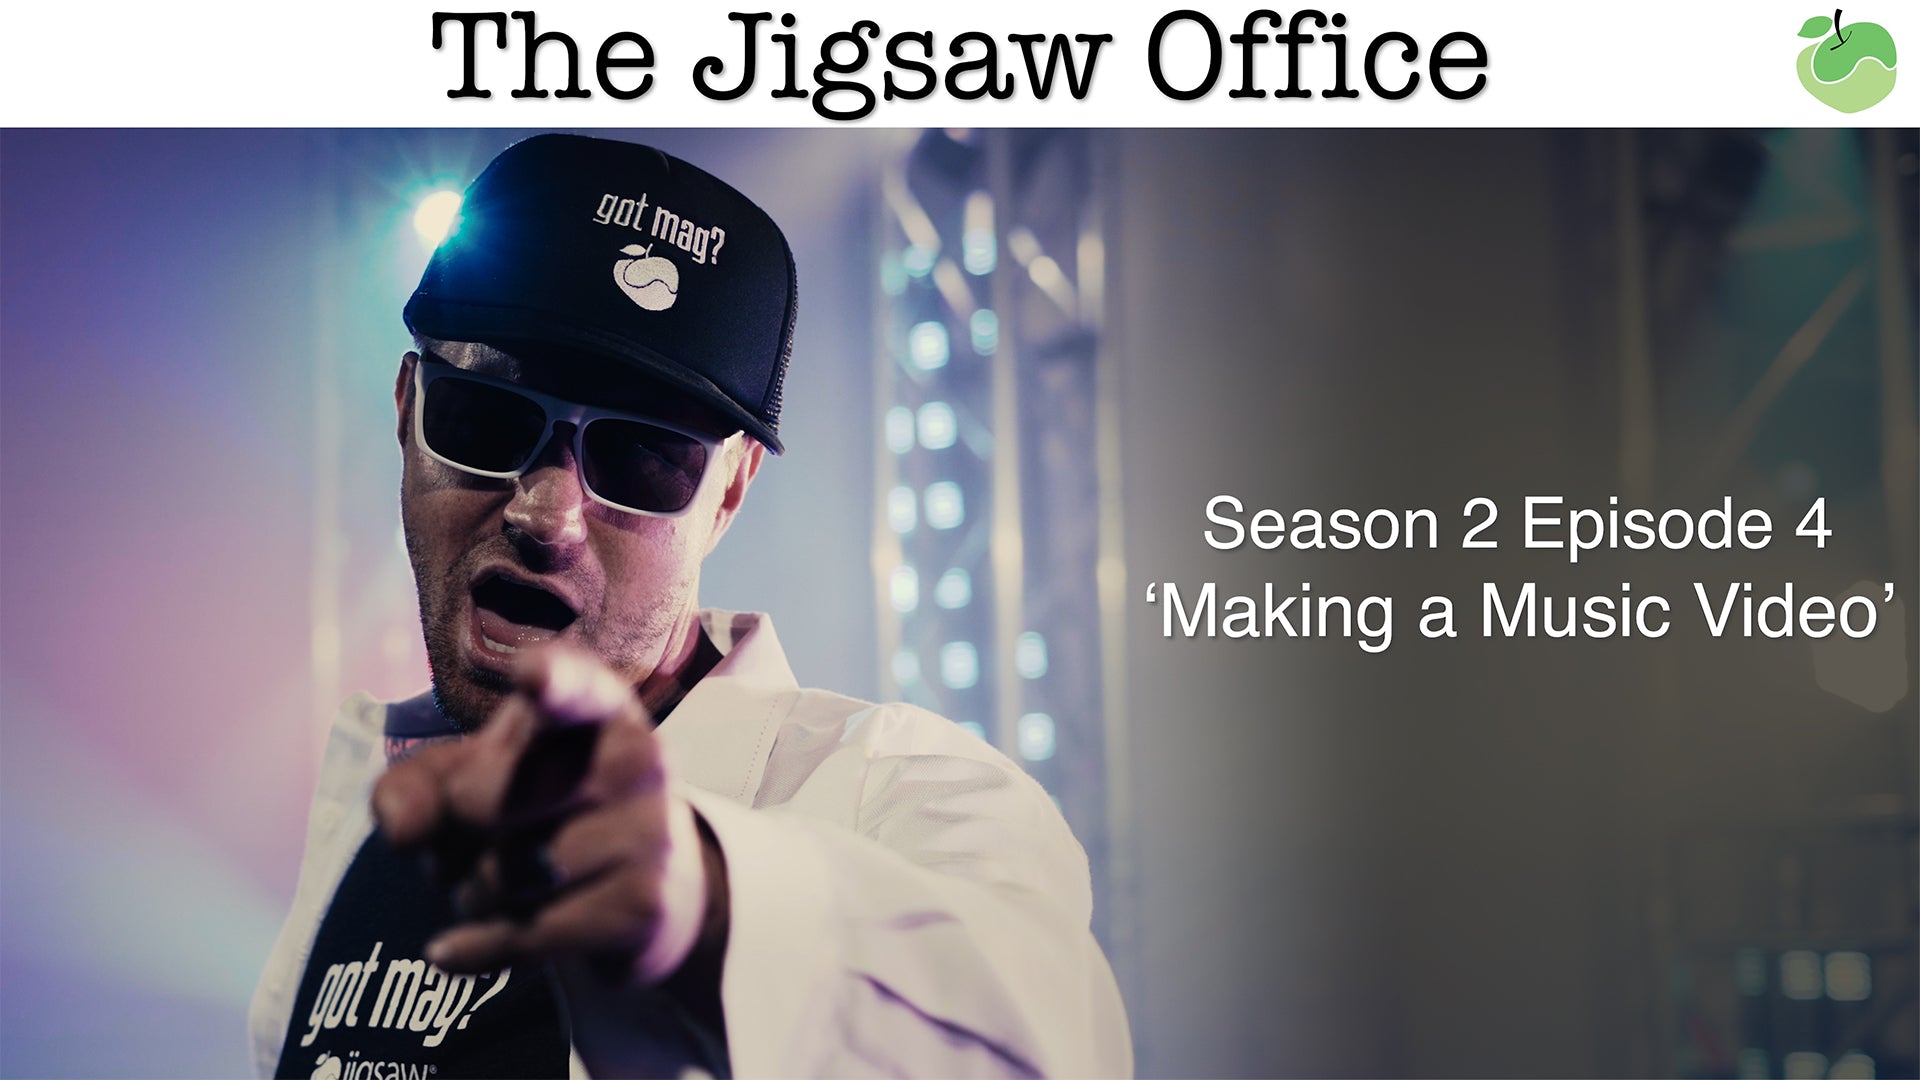 The Jigsaw Office Season 2 Episode 4: 'Making a Music Video' | #FunnyFriday